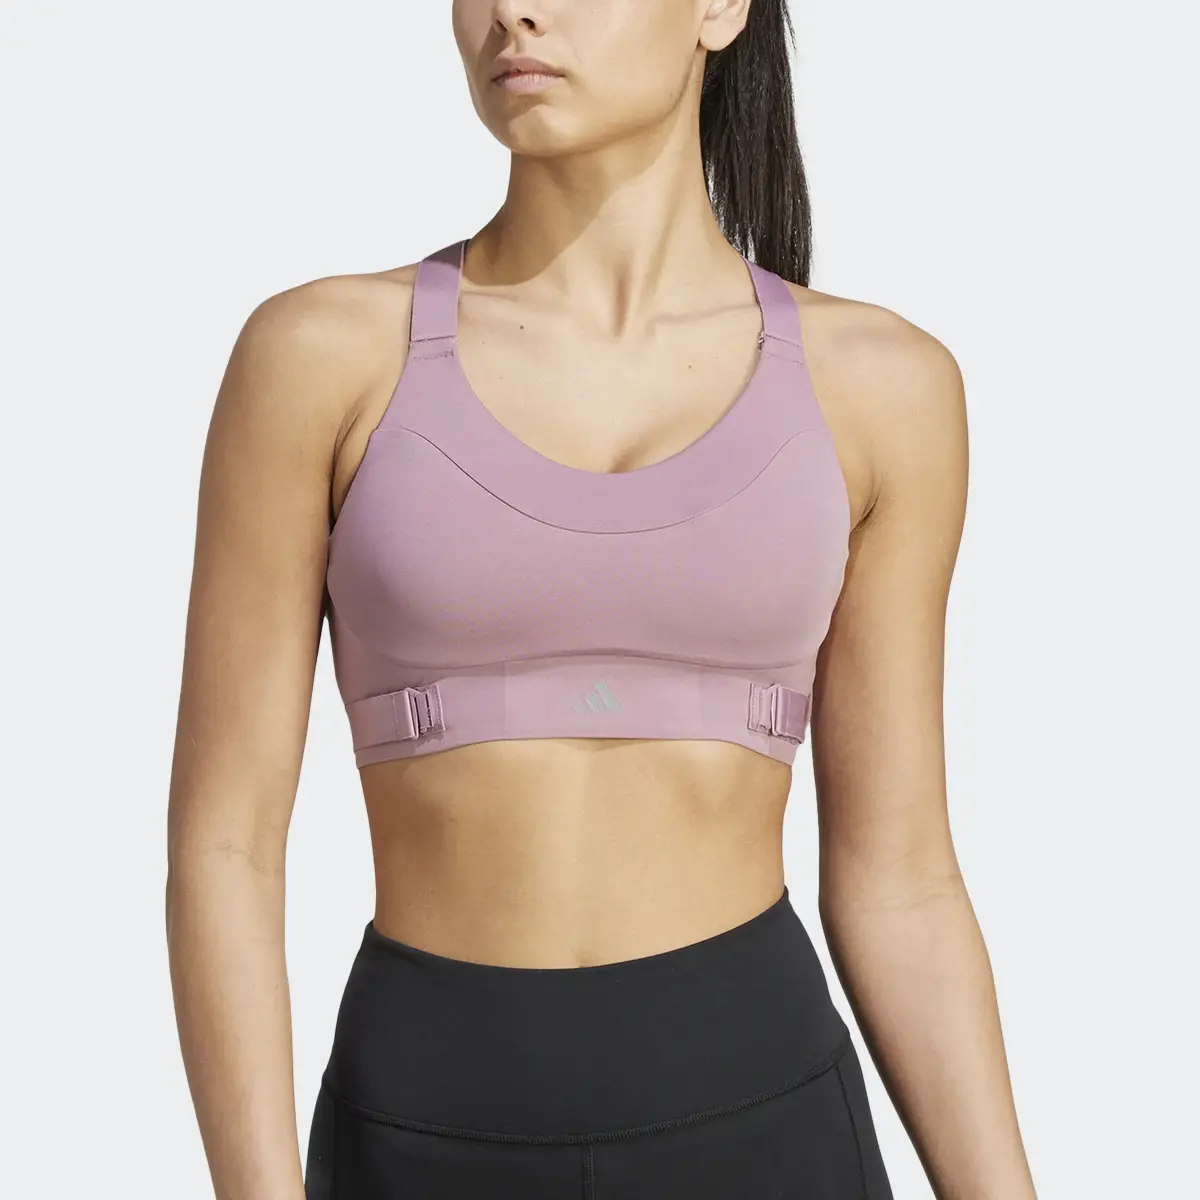 Adidas Brassière Collective Power Fastimpact Luxe Maintien fort. 1